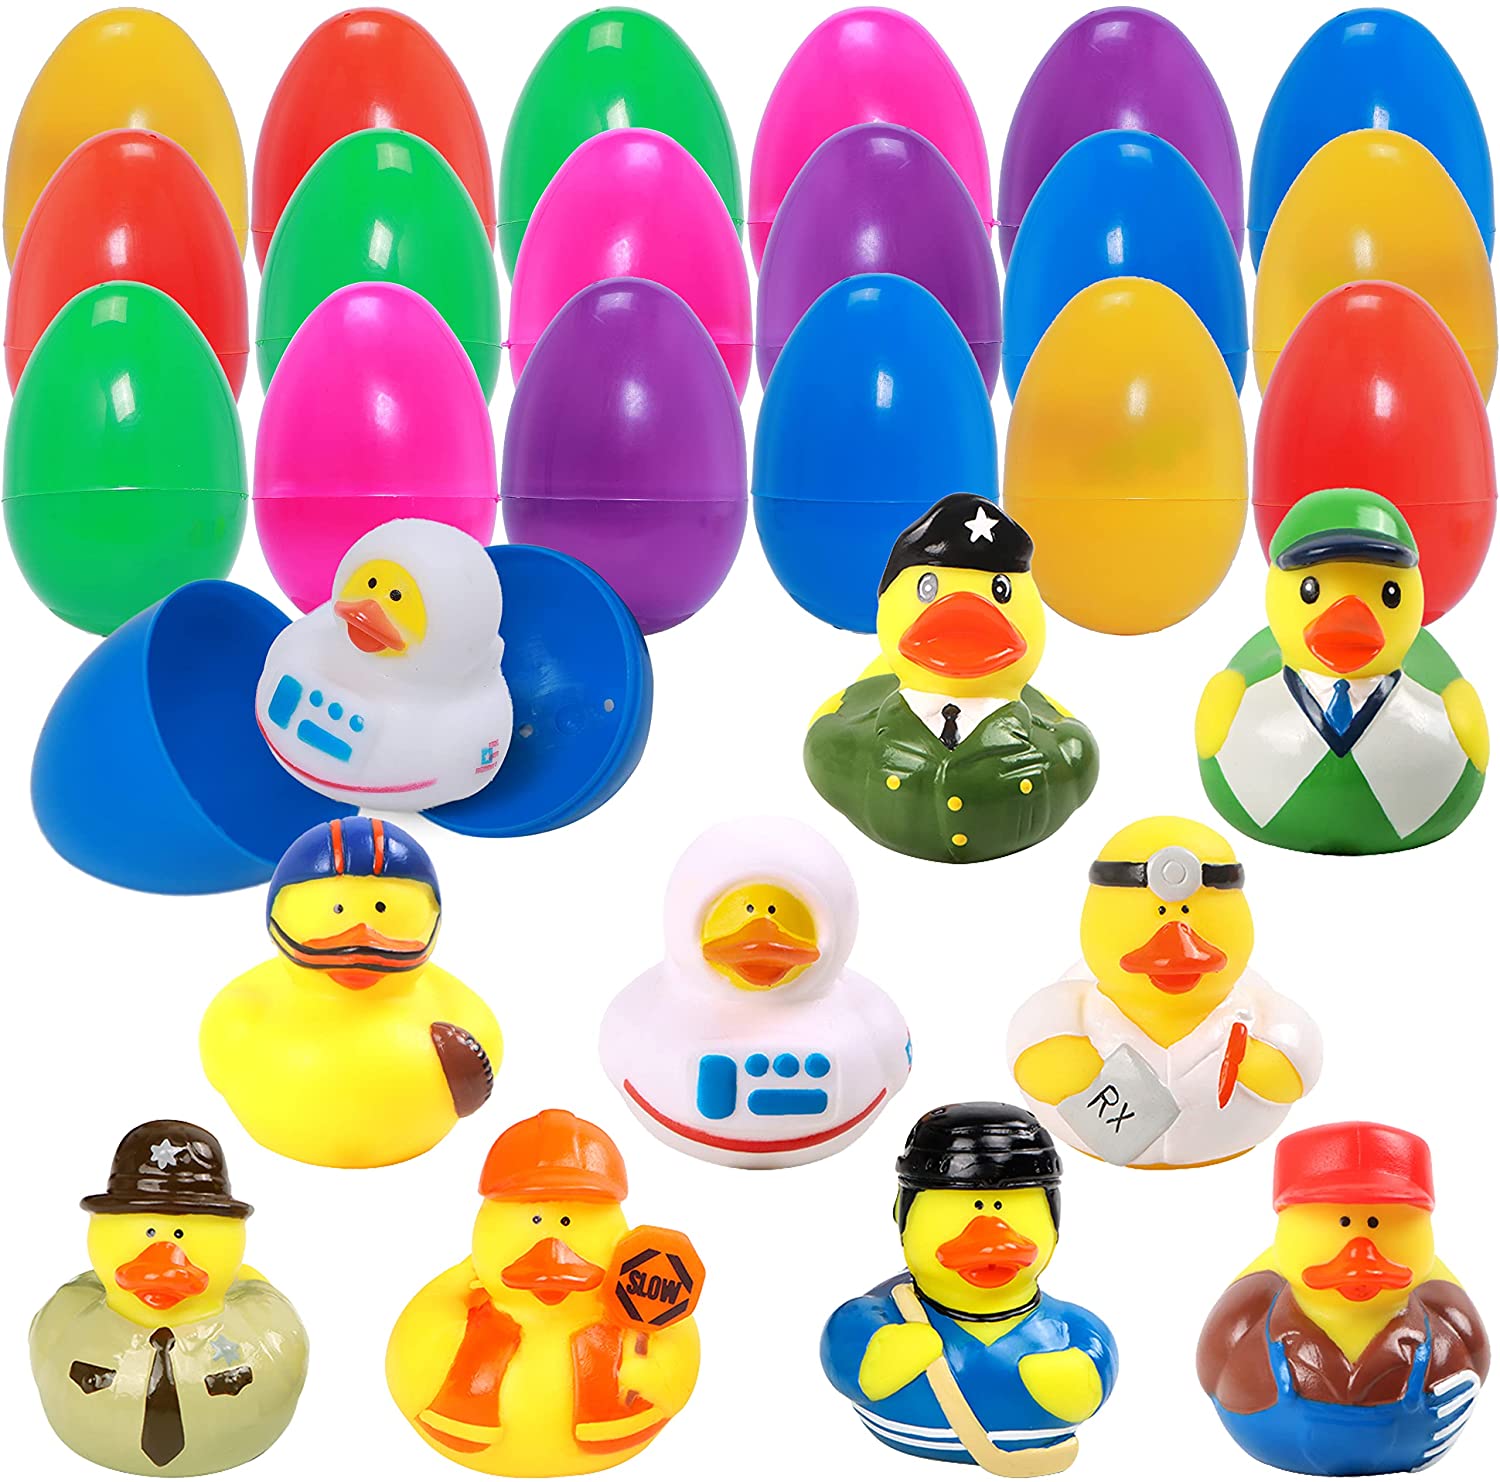 Rubber Ducks Filled Eggs, 18 Pack - One Stop Shop for All Celebration